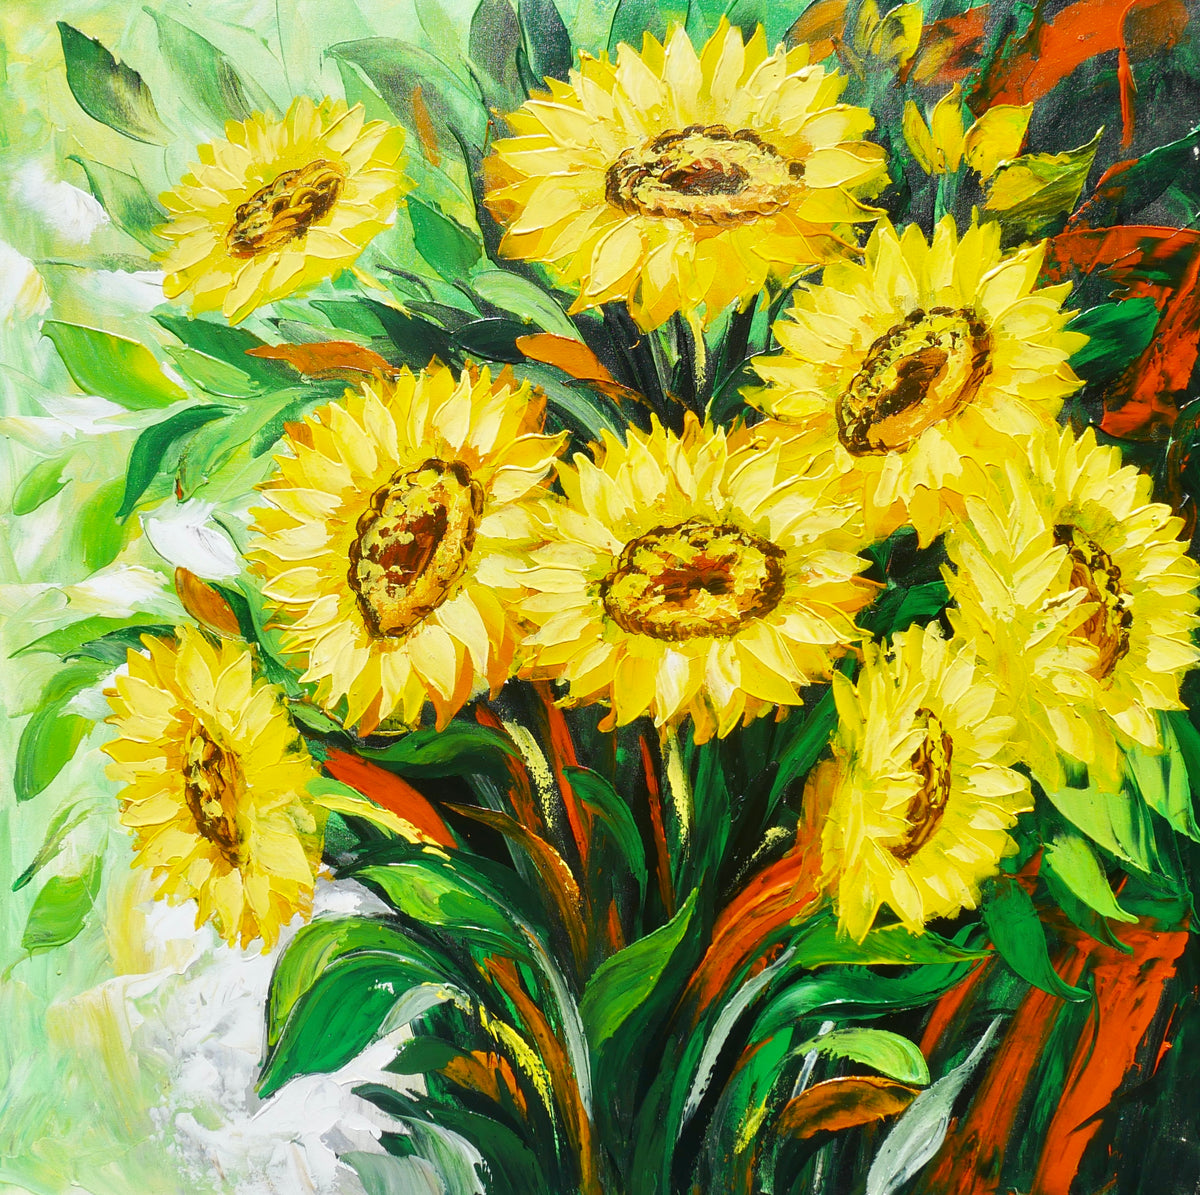 Cheerful Bouquet of Sunflowers Still Life Painting -- Acrylic on Canvas (Square -- 3 sizes available)